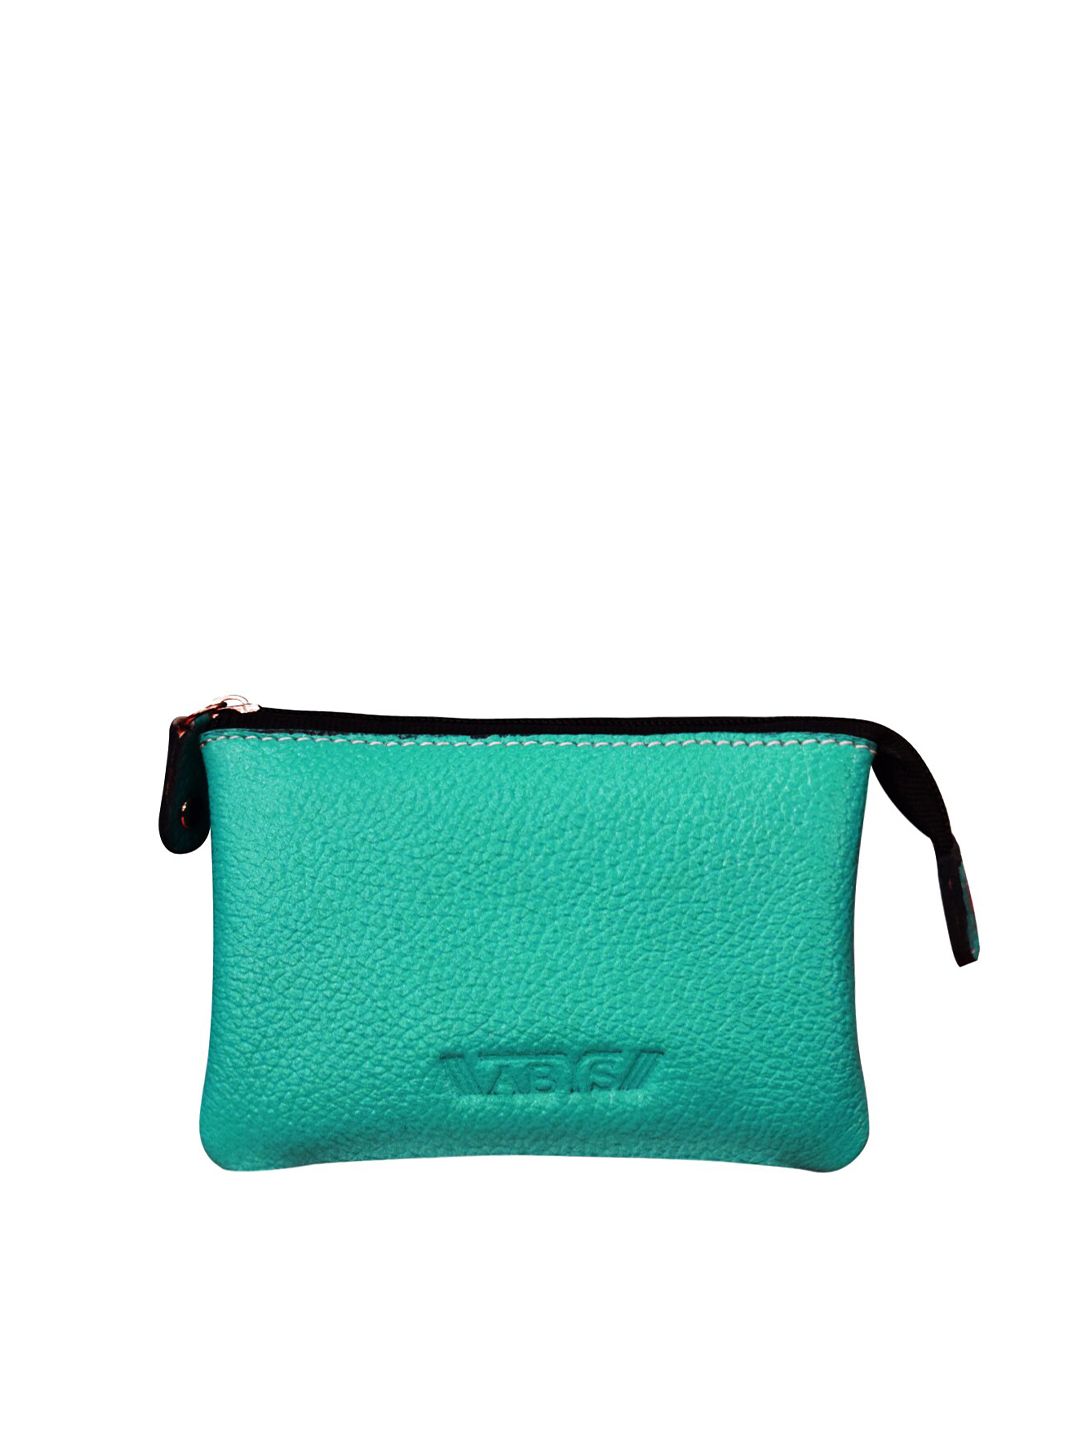 ABYS Teal Genuine Leather Mini Zipper Pouch Price in India